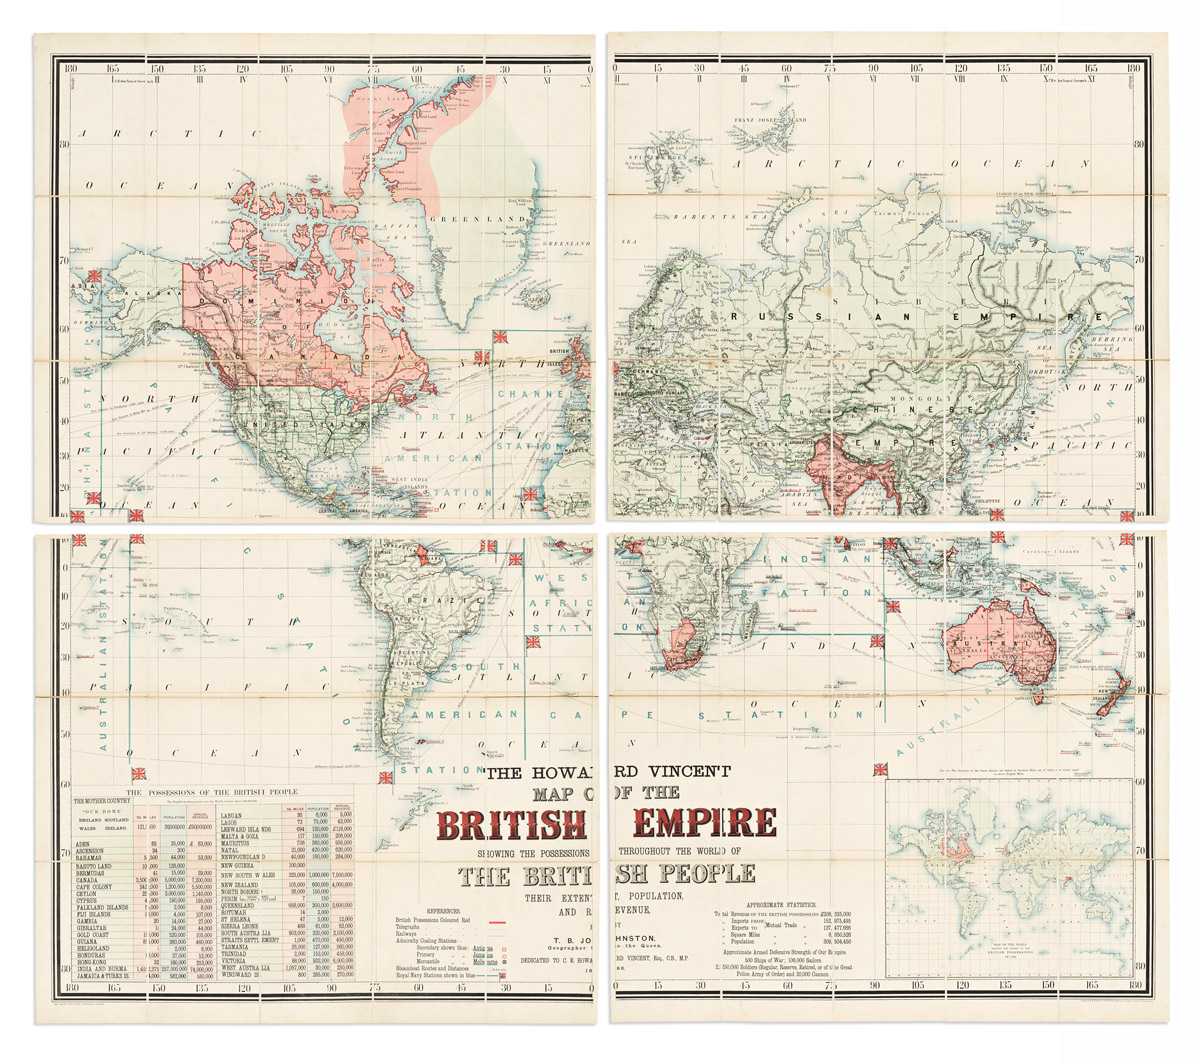 (BRITISH EMPIRE.) T.B. Johnston. The Howard Vincent Map of the British Empire